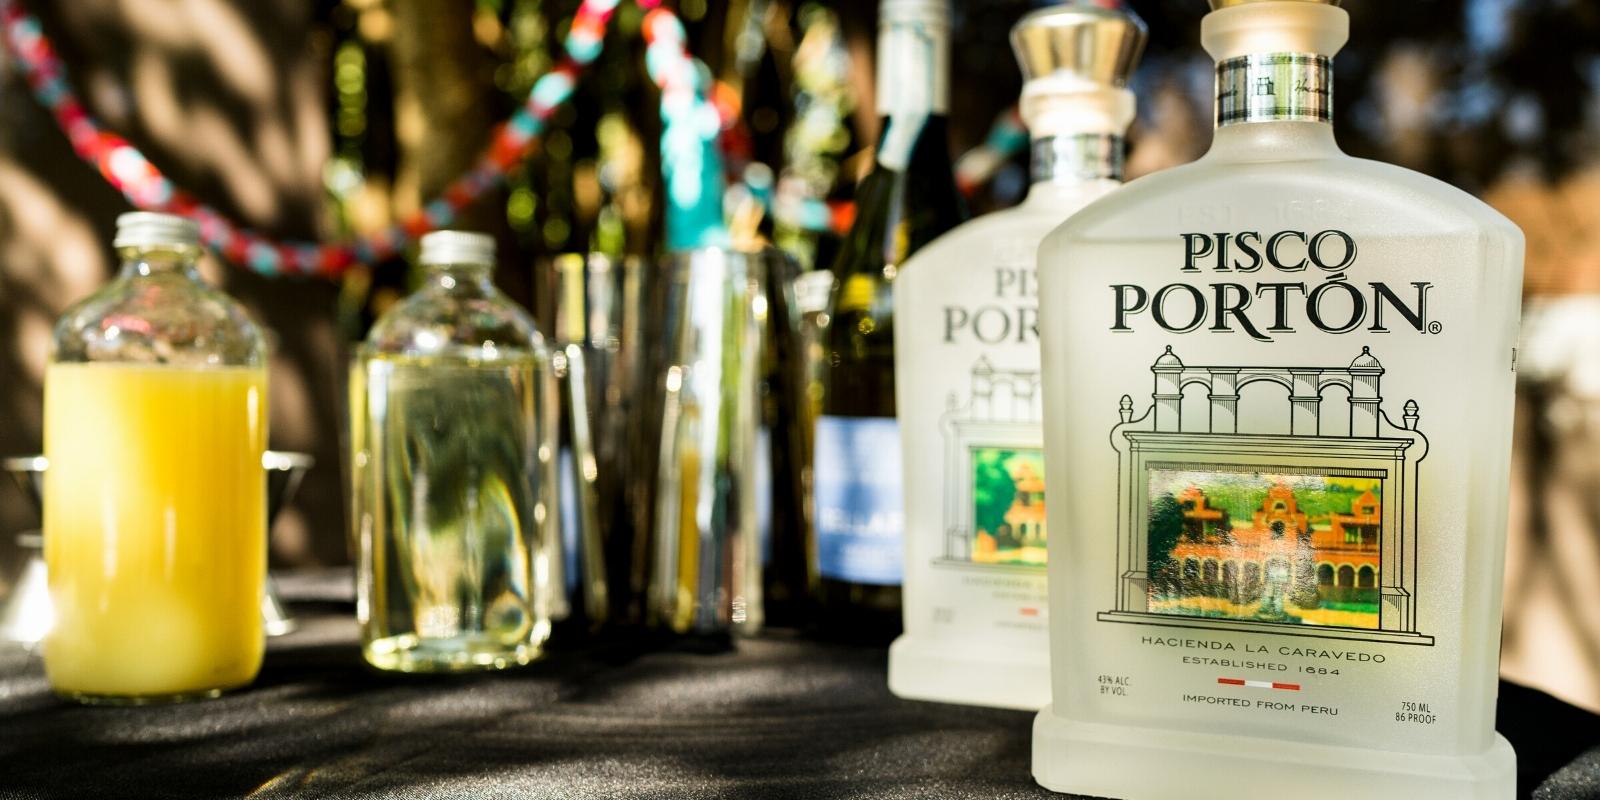 10 best souvenirs of Peru you should to buy, pisco